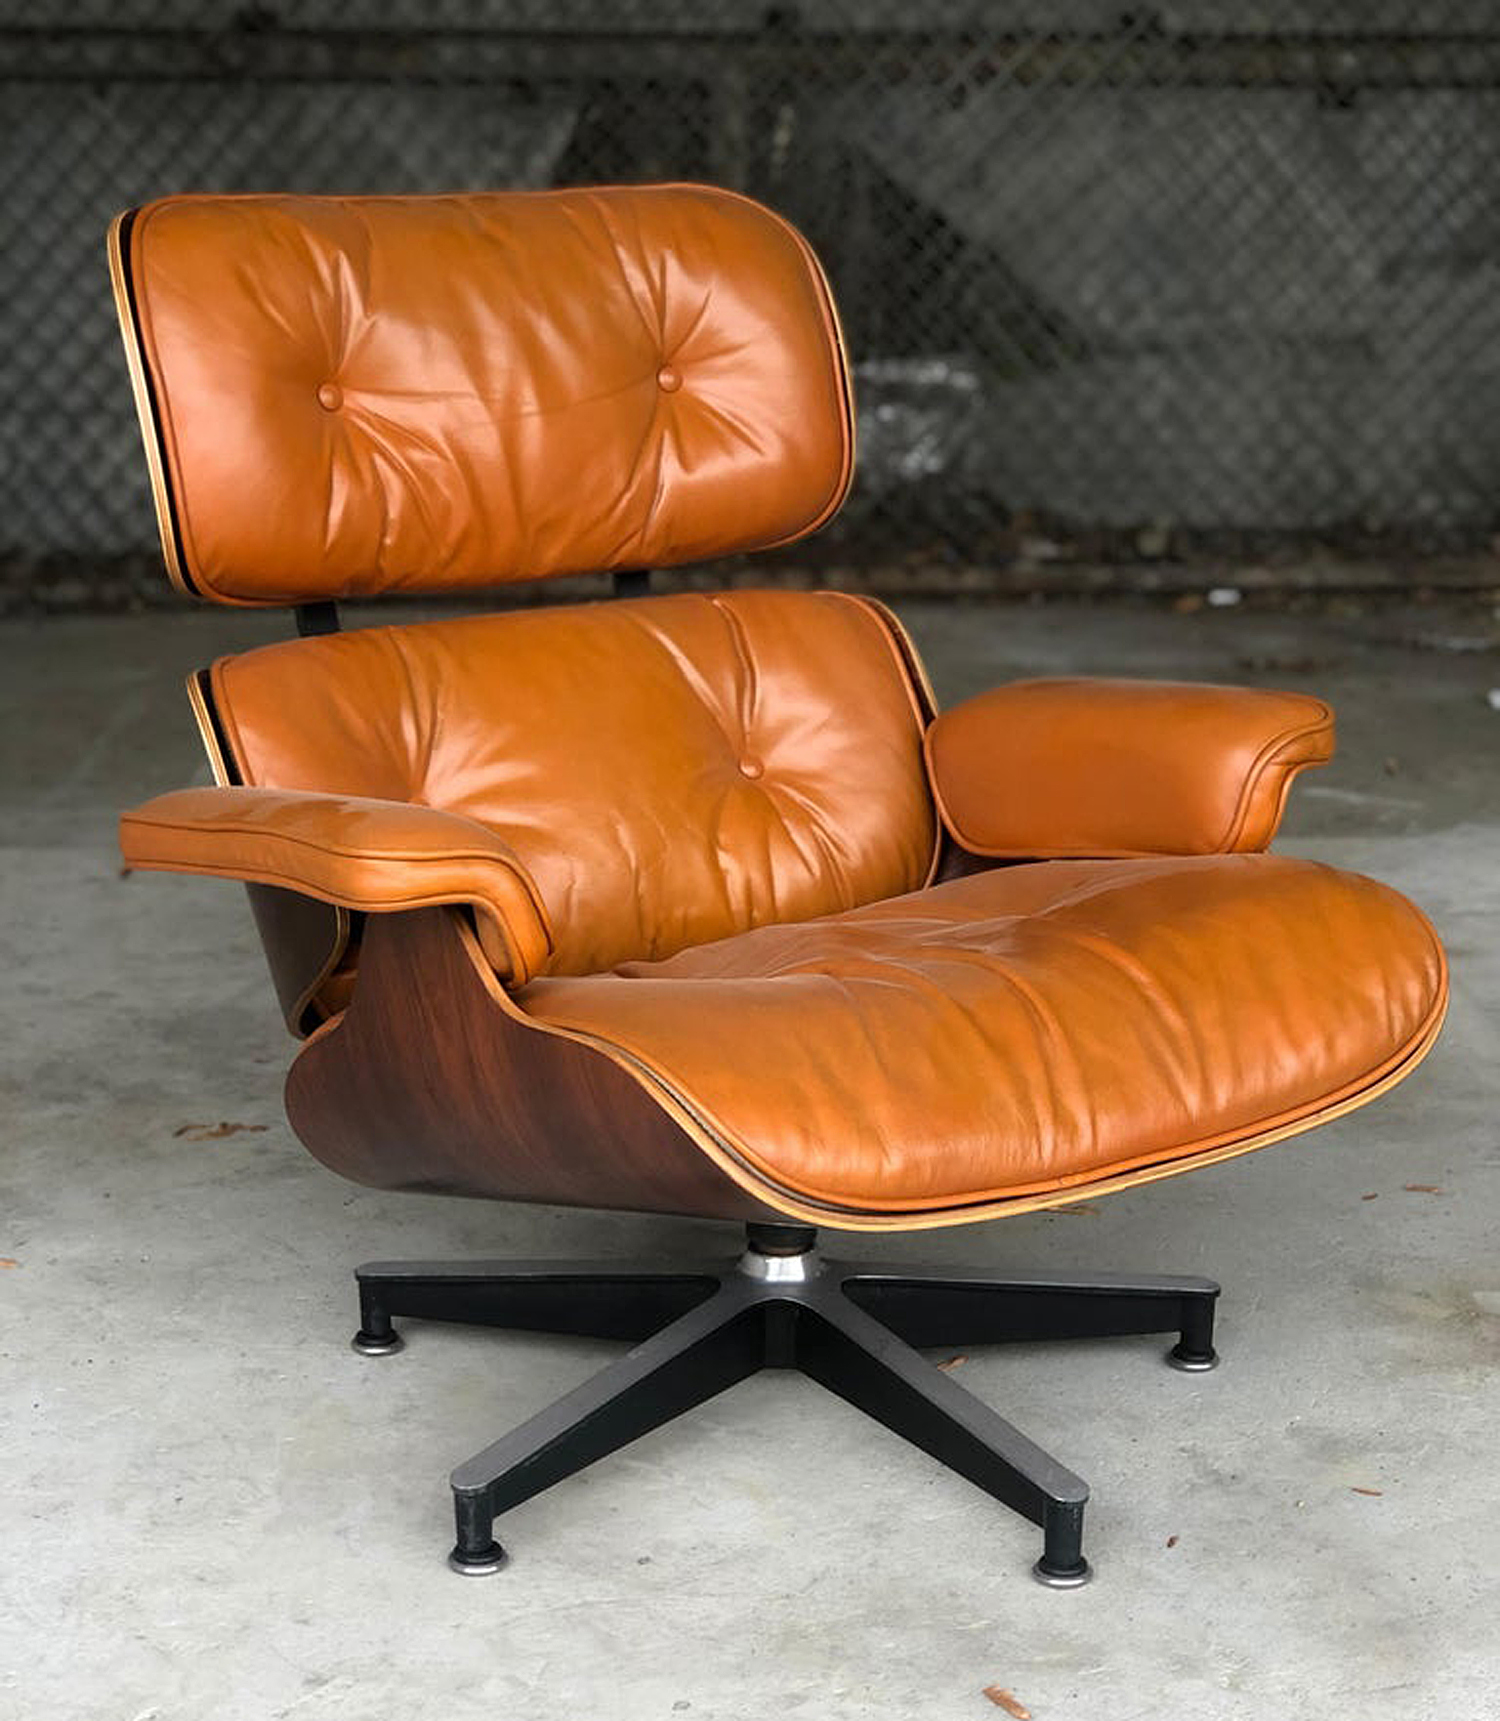 An Eames Lounge Chair in burnt orange leather